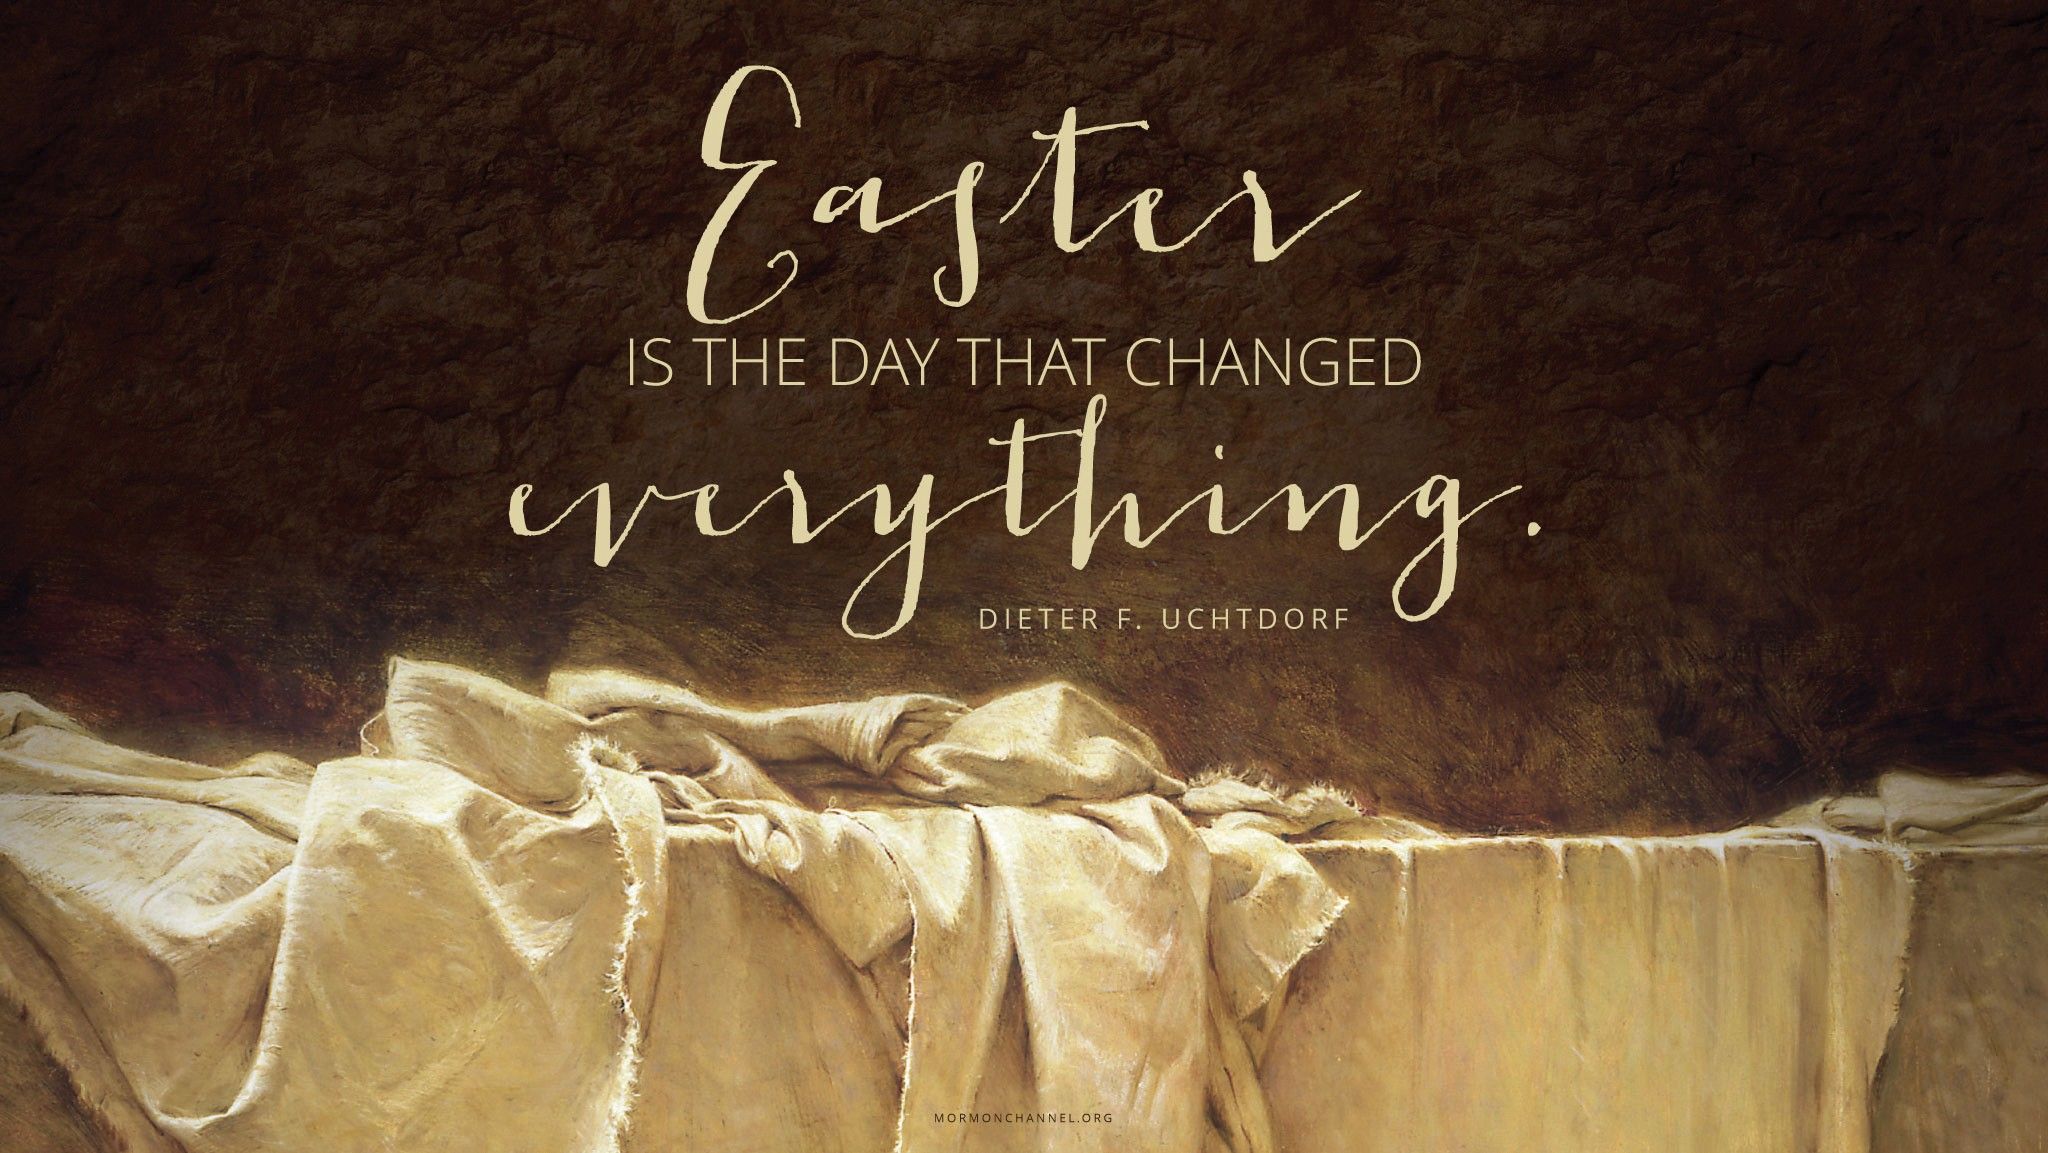 “[Easter] is the day that changed everything.”—President Dieter F. Uchtdorf, “The Gift of Grace”